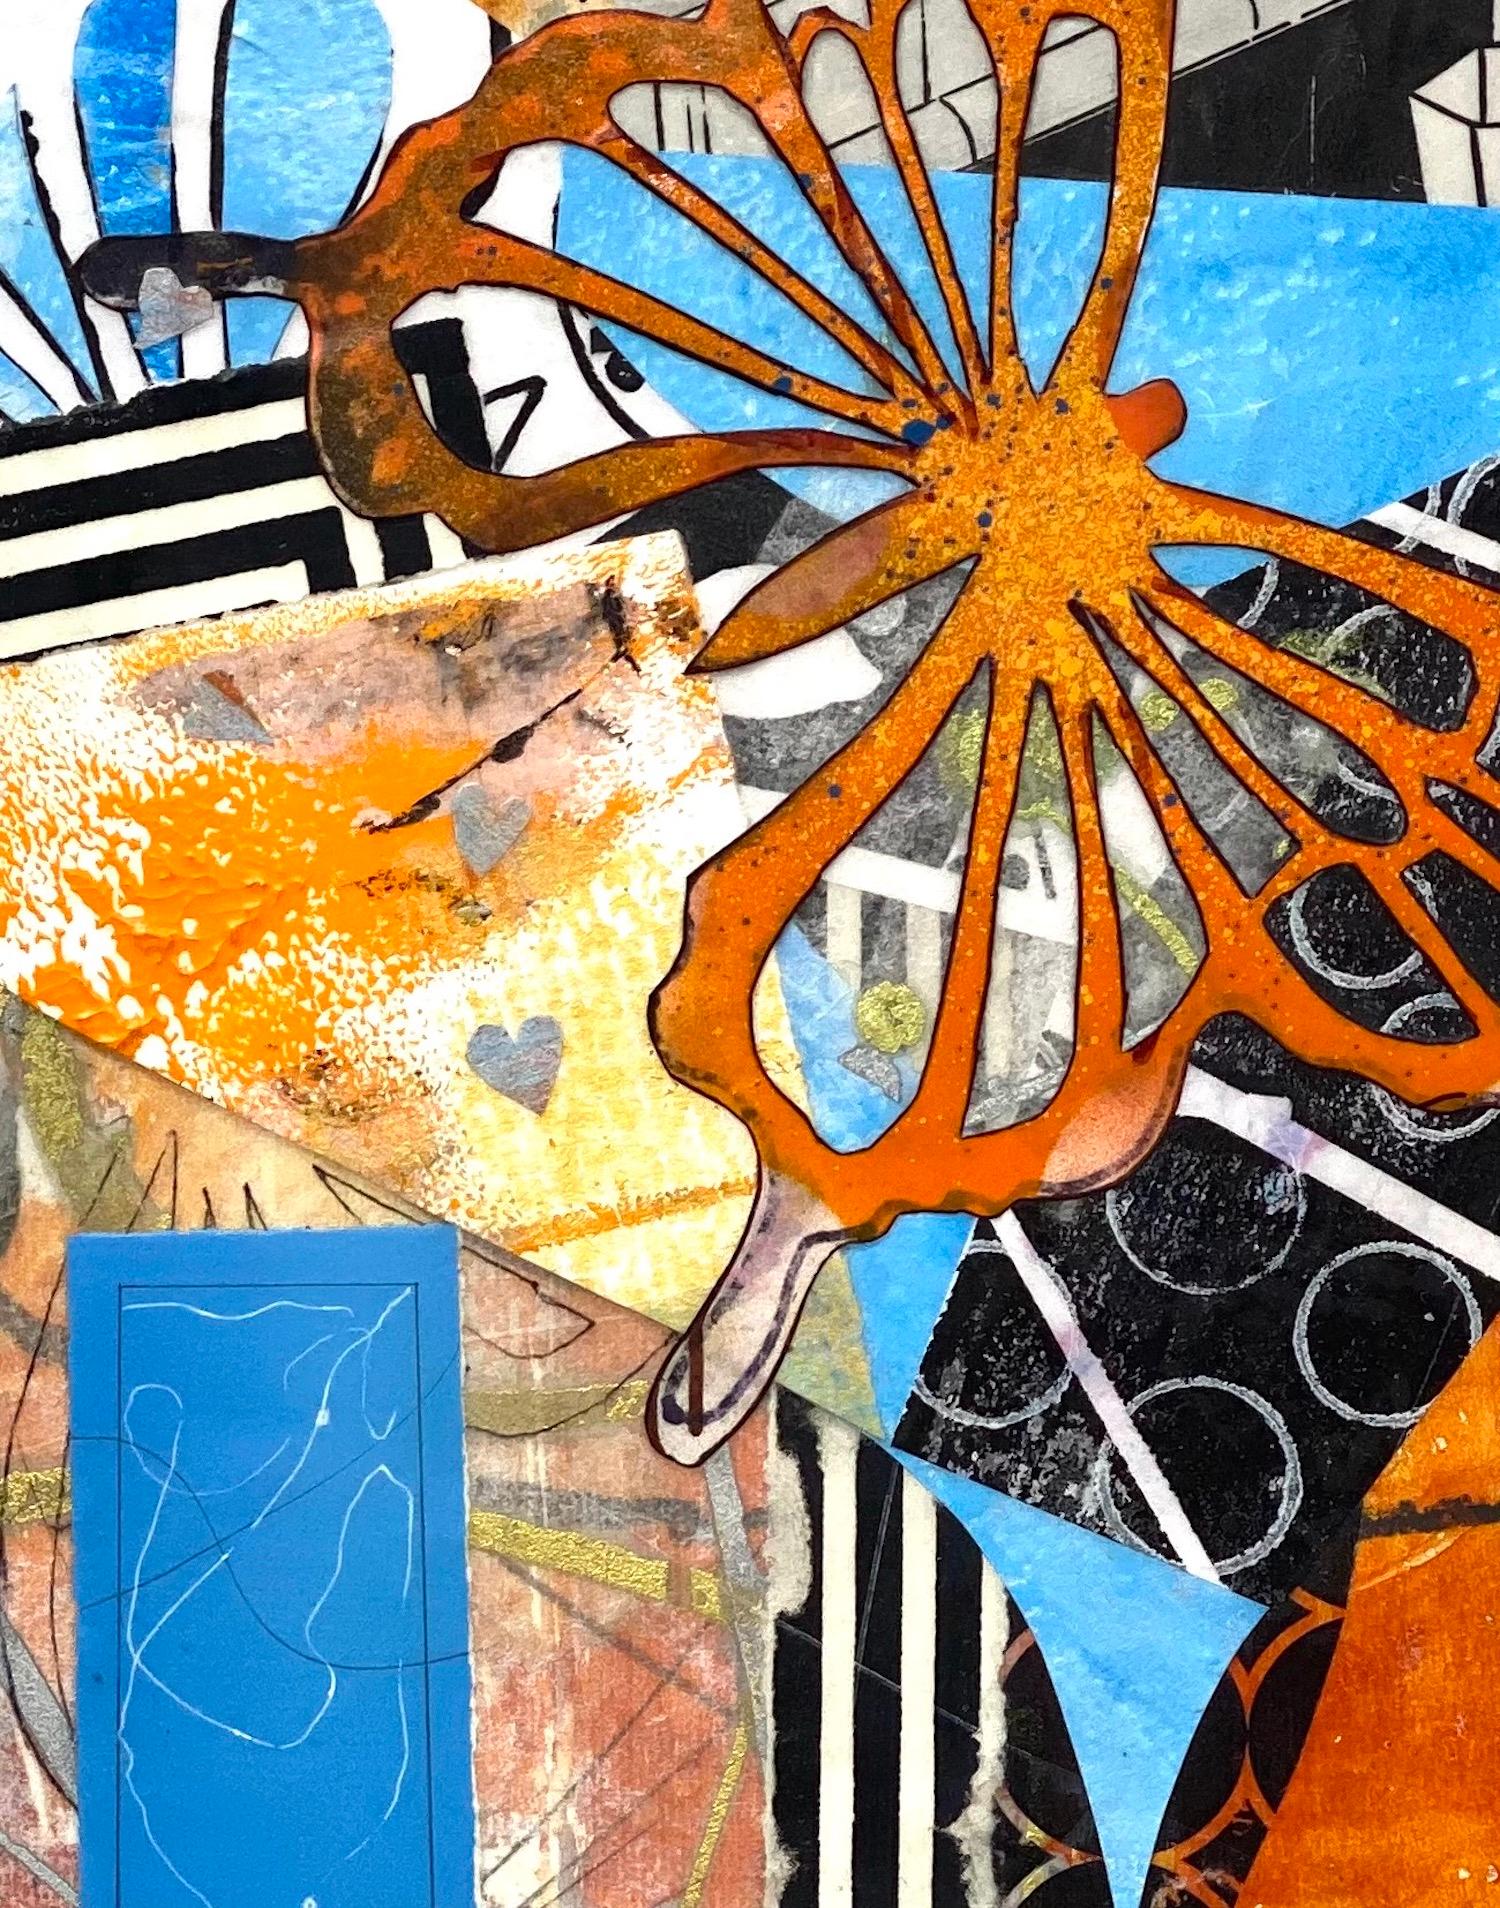 <p>Artist Comments<br />A vibrant multi-layered mixed media abstract in shades of blue, black, orange, and embedded with hand-printed paper and monoprints. “This piece was inspired by the butterflies outside my studio window,” says artist Linda